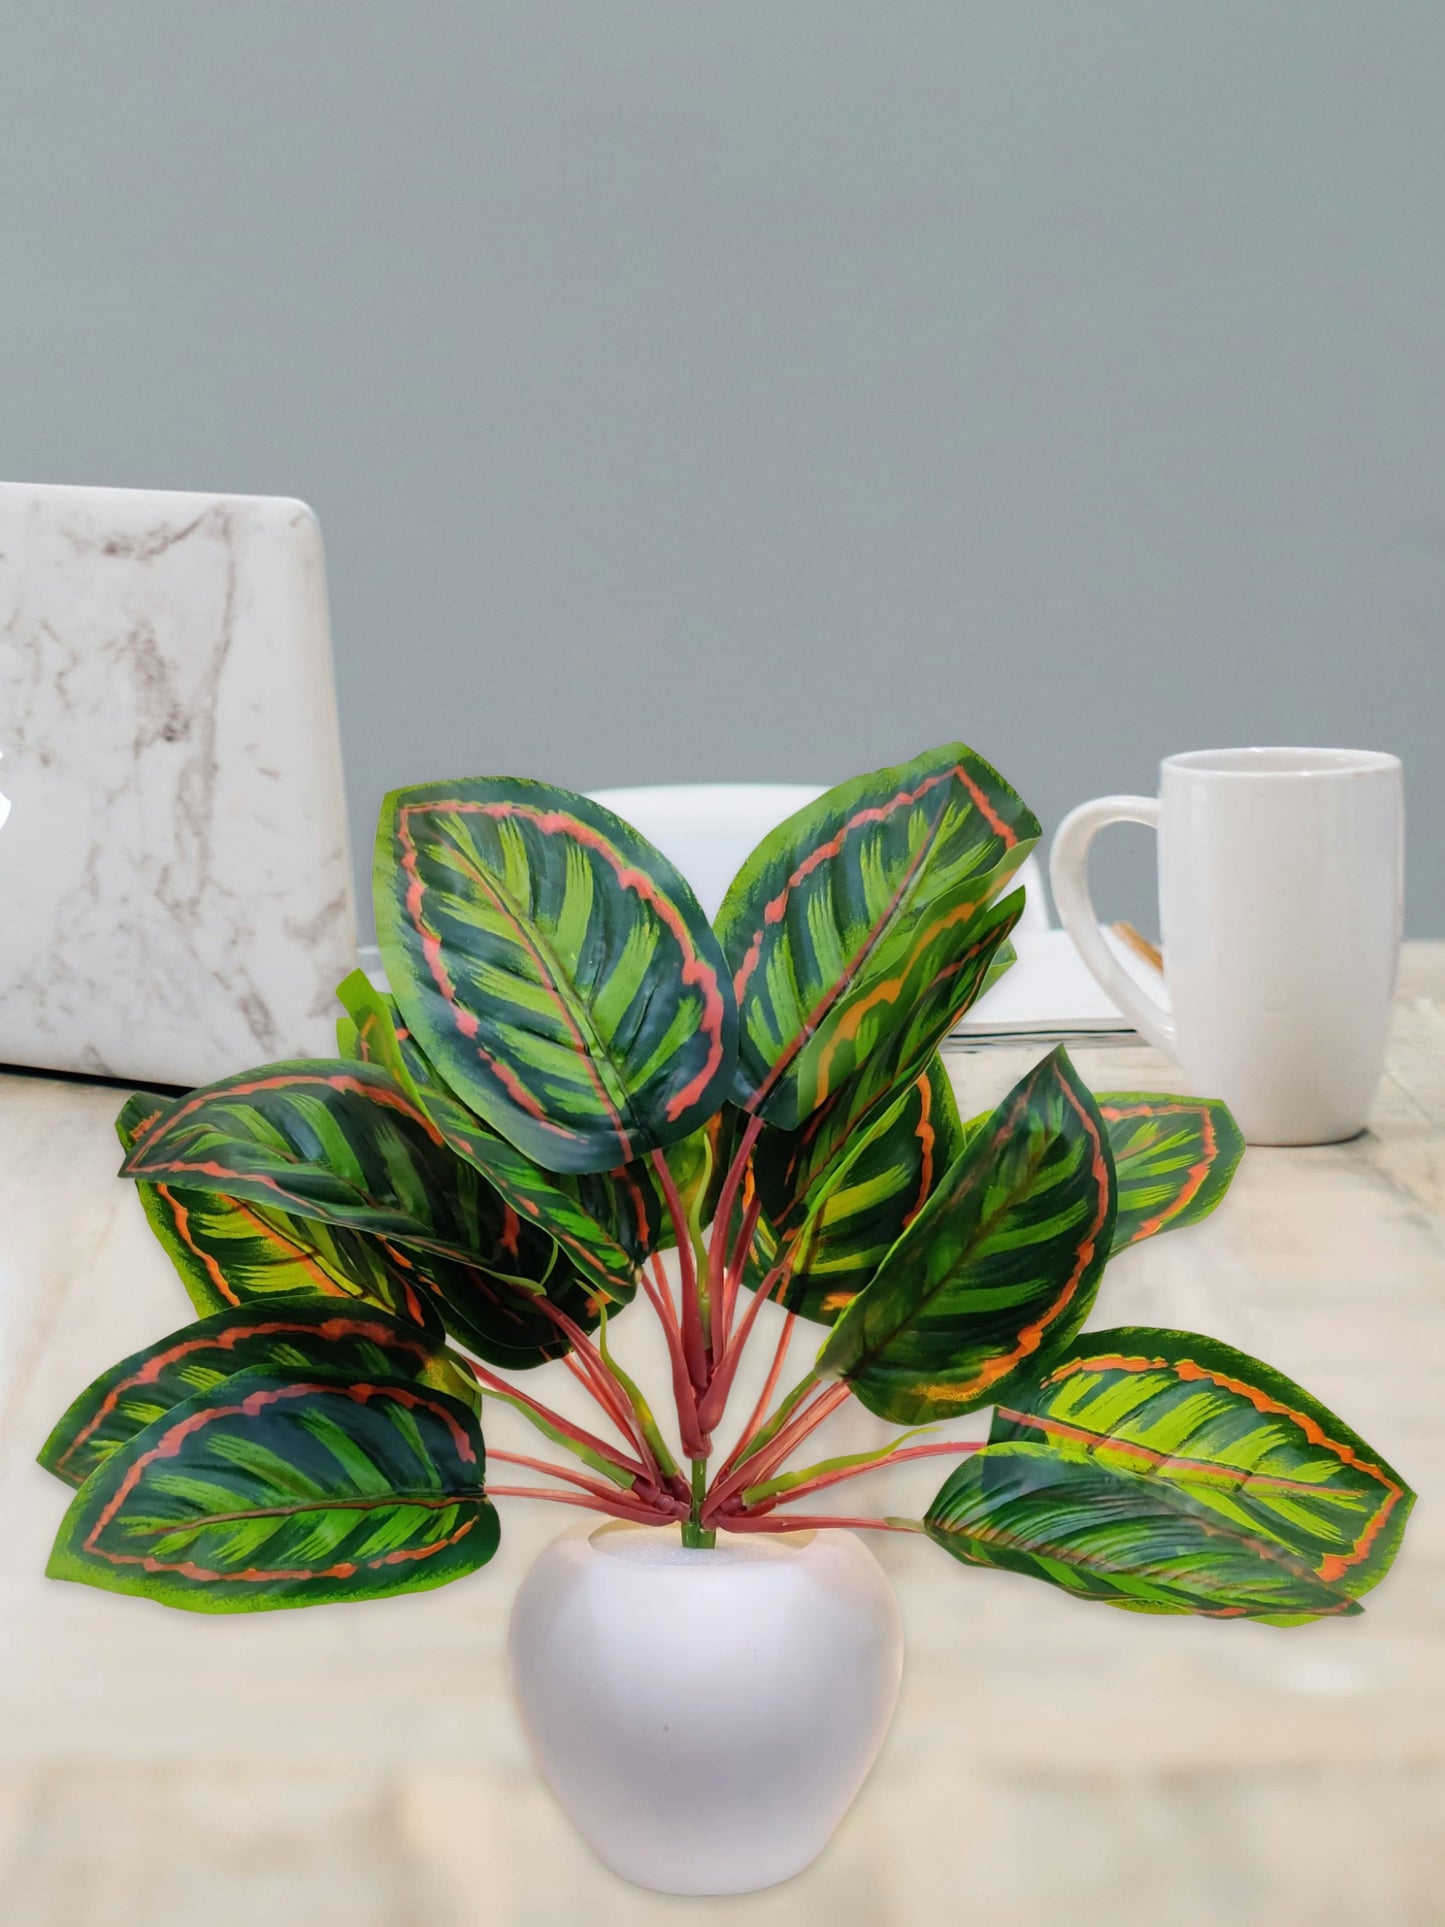 Blooming Beauty: Artificial Plant in Stylish Pot for Effortless Home Decor. Artificial Leaves with Pot Plants for Home Decoration, Leaves Bunch Flowers with Pot Office Decor, Craft and DIY, Combo, Orange Green